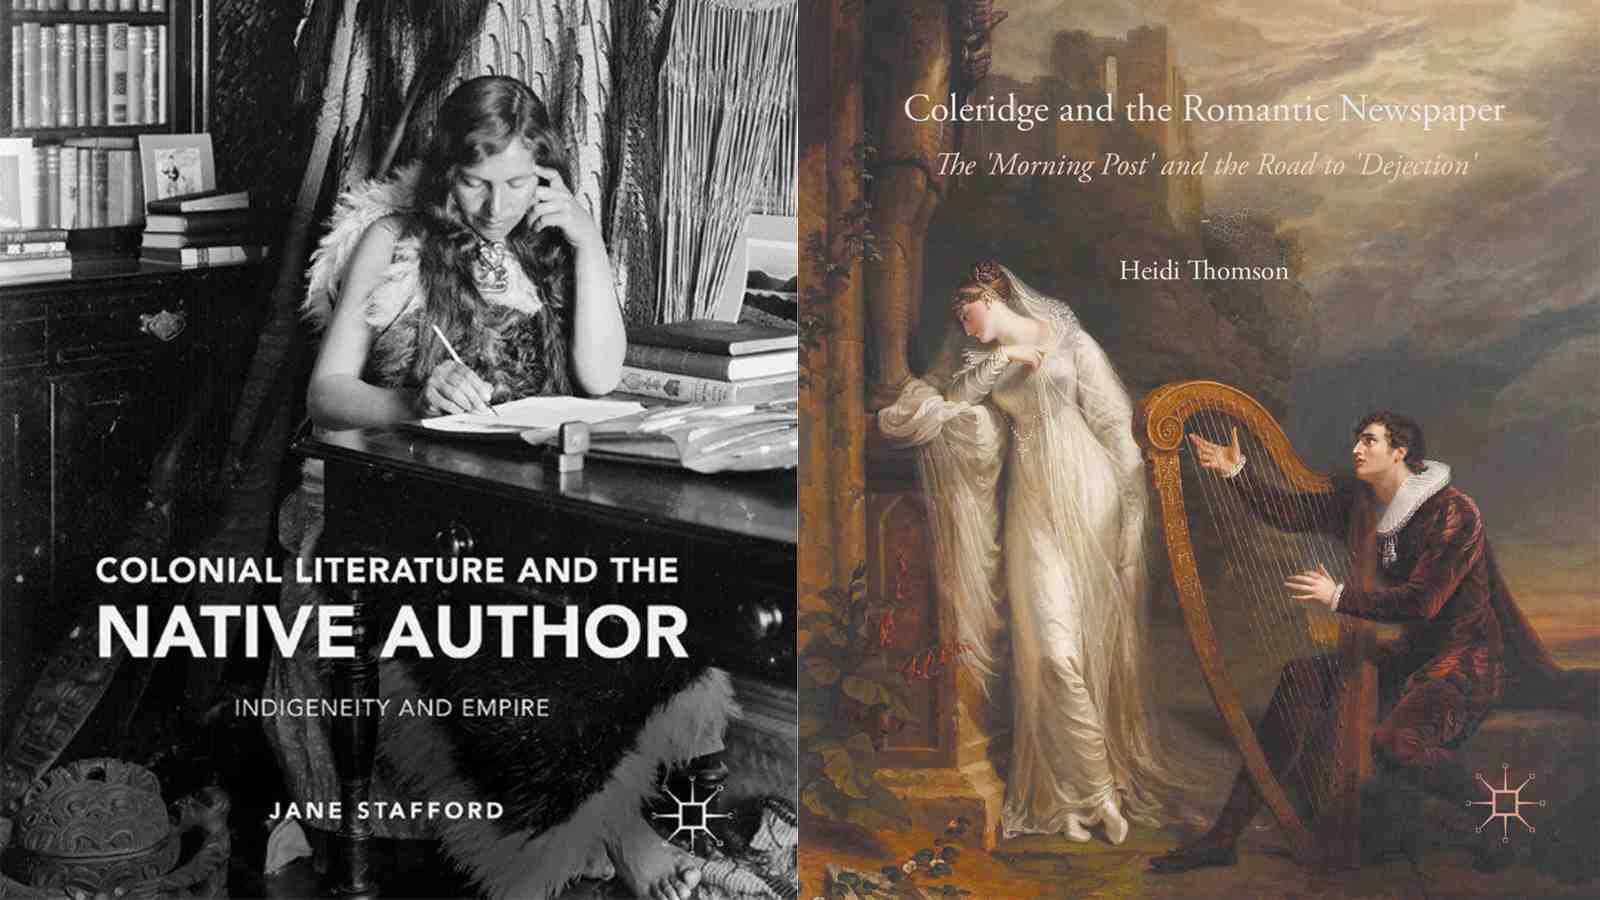 Jane Stafford's Colonial Literature and the Native Author, Heidi Thomson's Coleridge and the Romantic Newspaper.